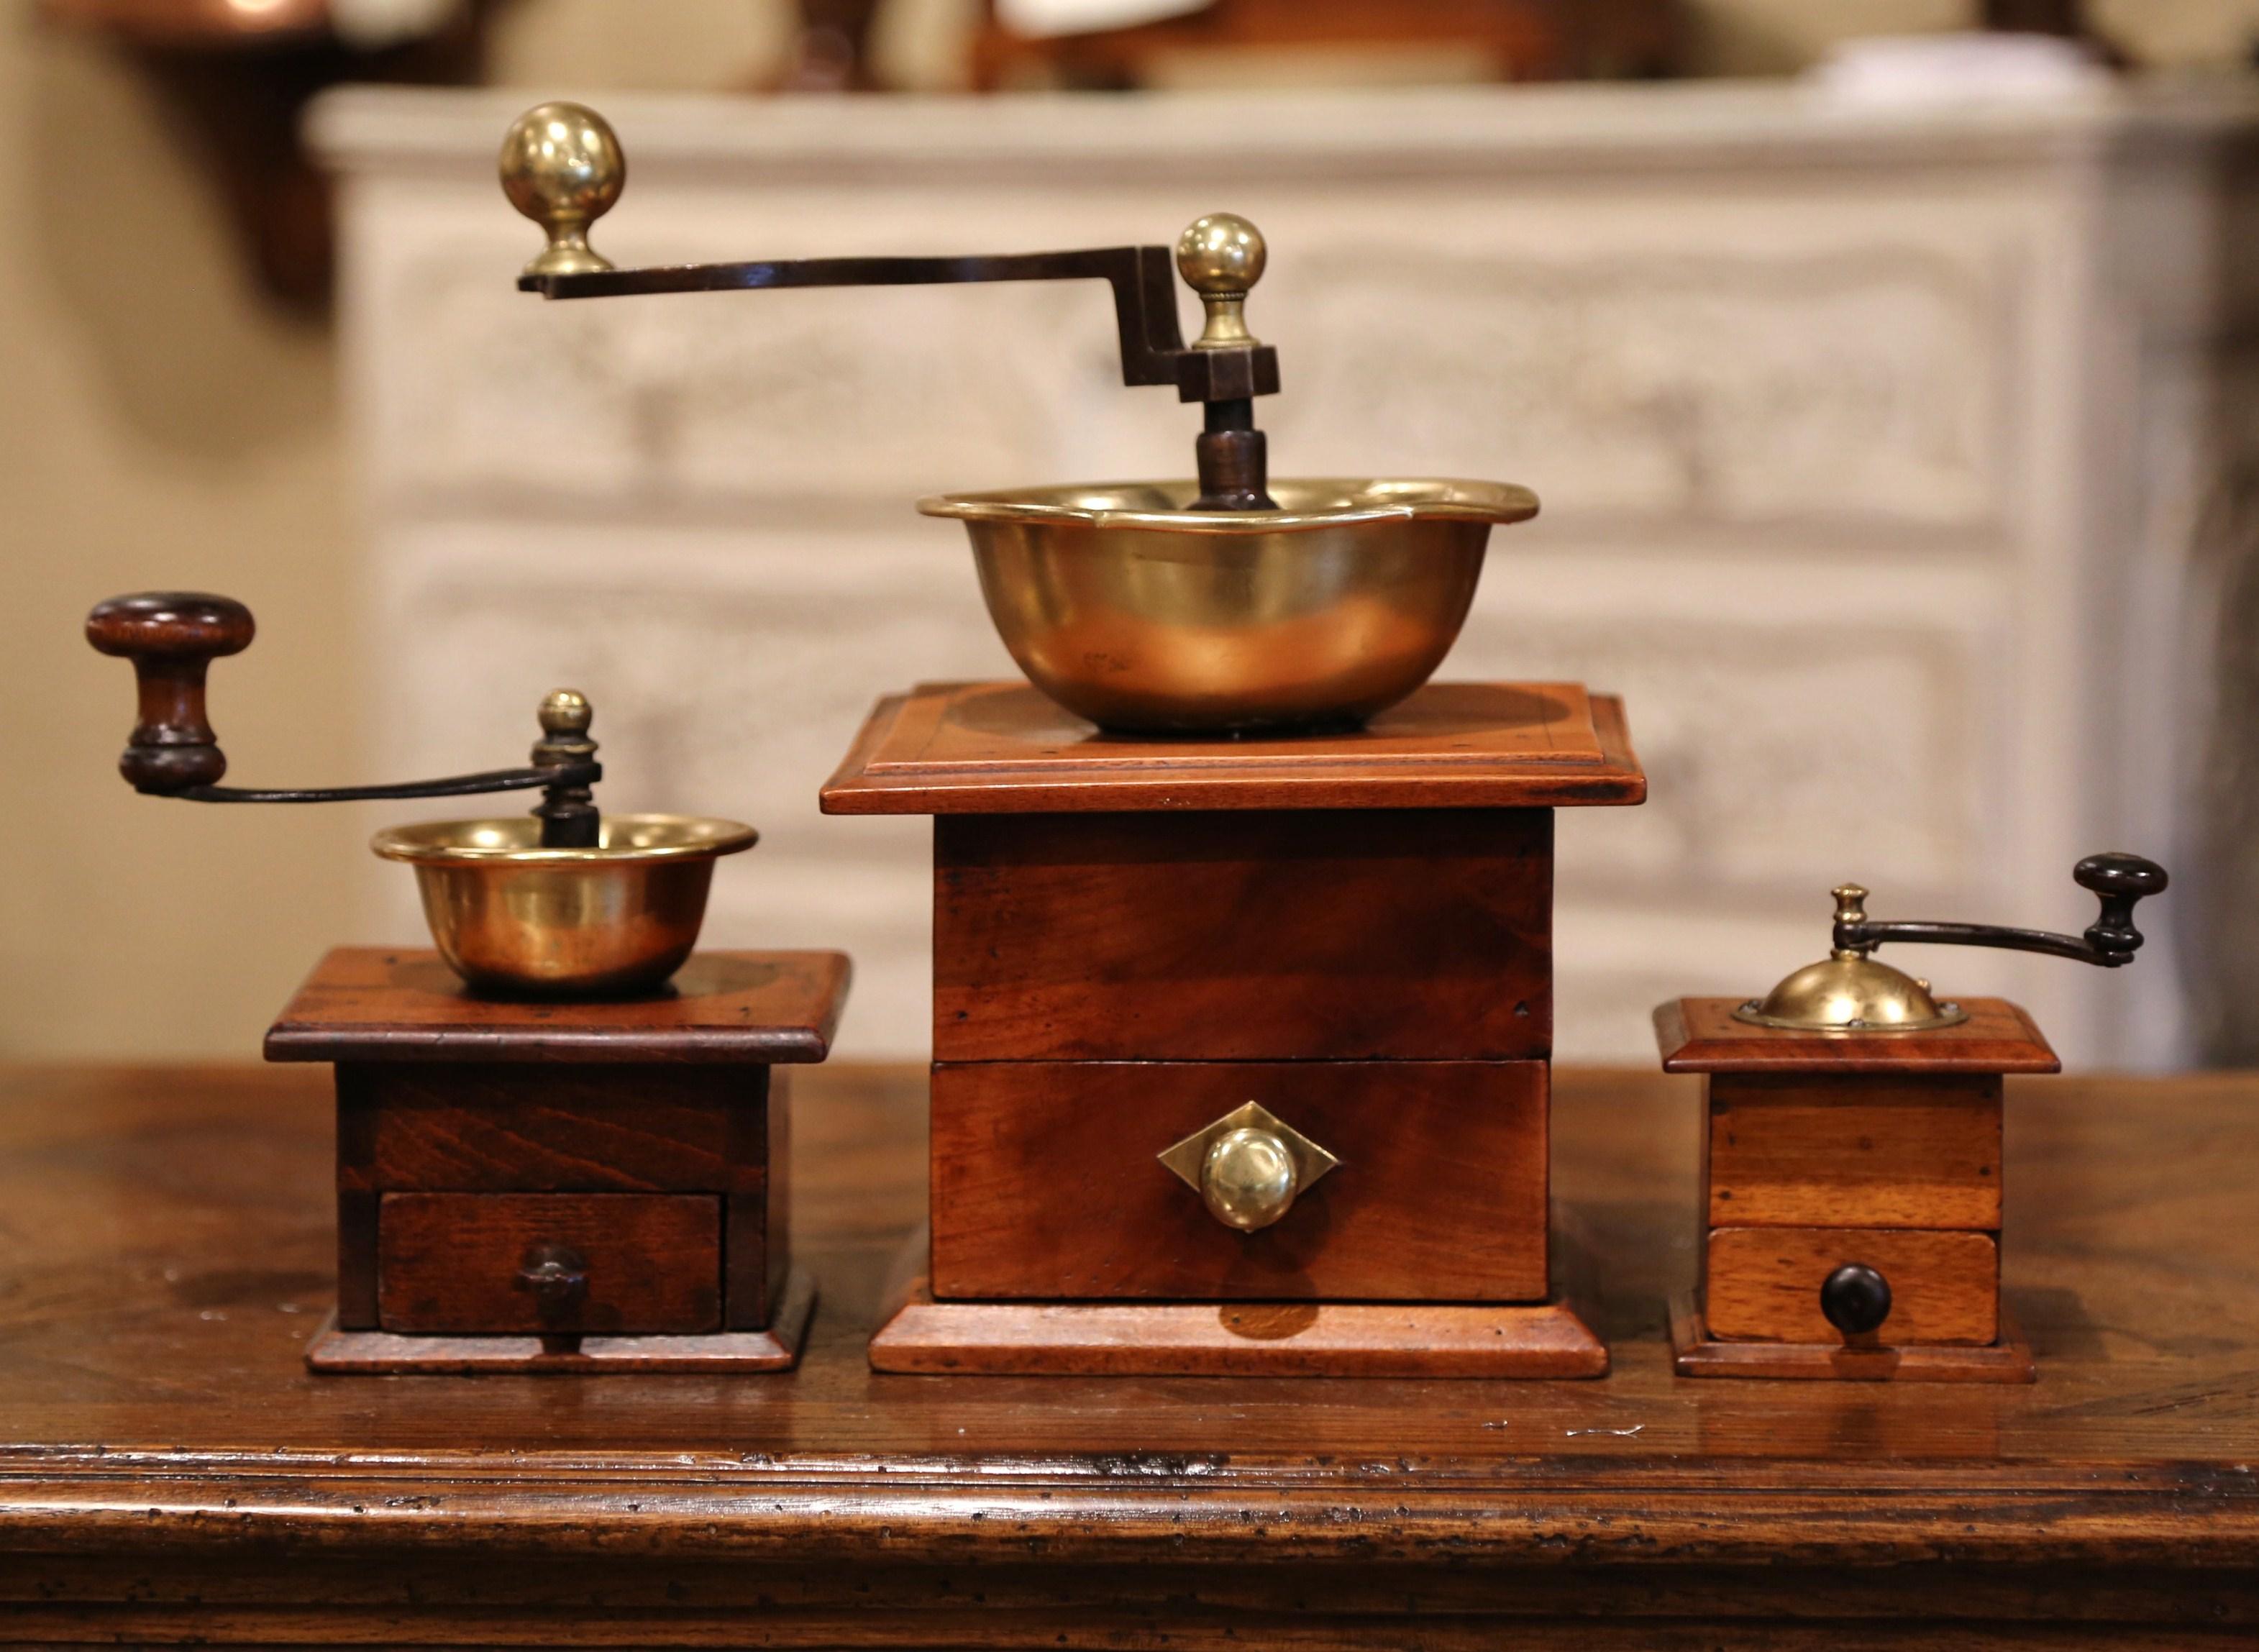 Decorate a country French kitchen with this antique coffee grinders set collection in graduated sizes. Crafted in France circa 1880 and made of walnut, iron and brass, all grinders are in excellent working condition with a rich patinated finish.